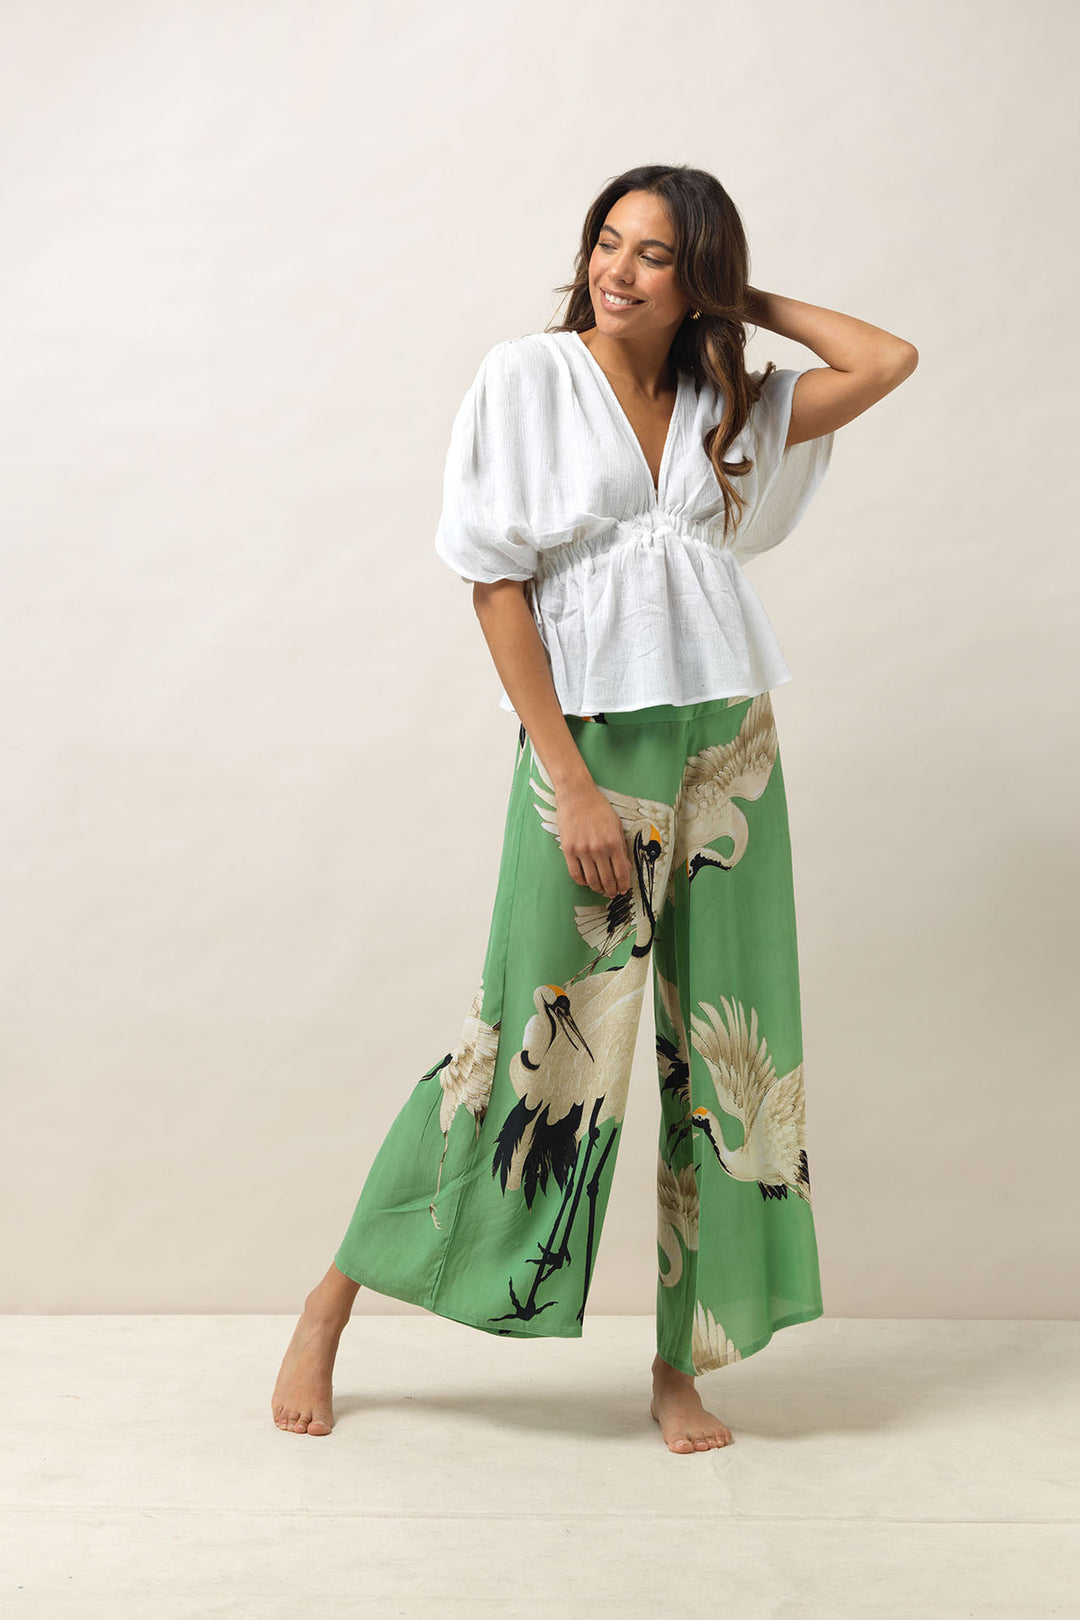 Women's palazzo pants trousers crepe in in pea green and white stork print by One Hundred Stars